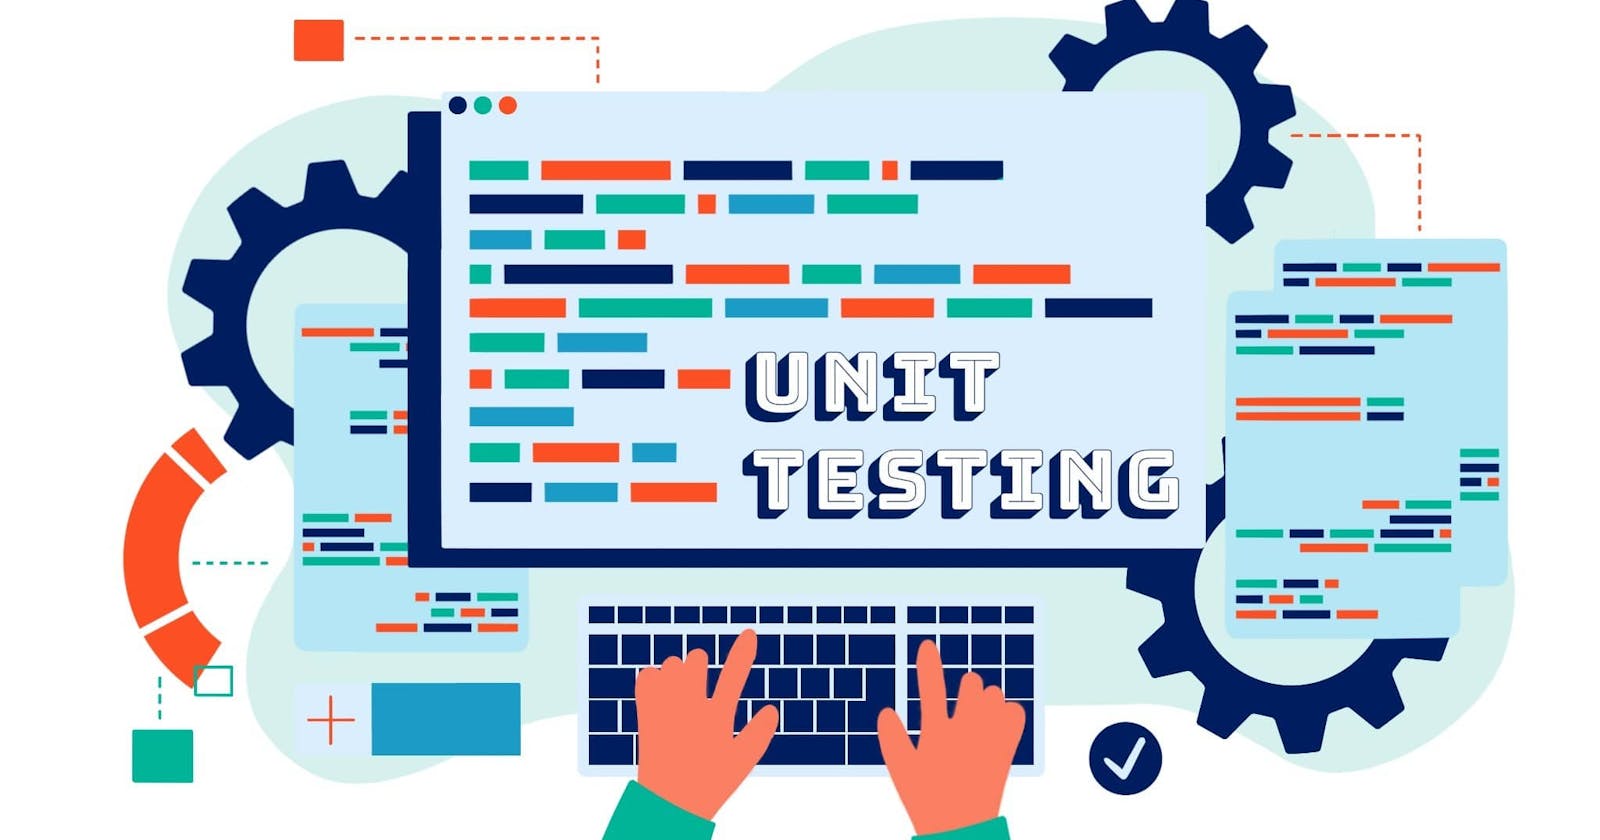 What is unit testing anyways?